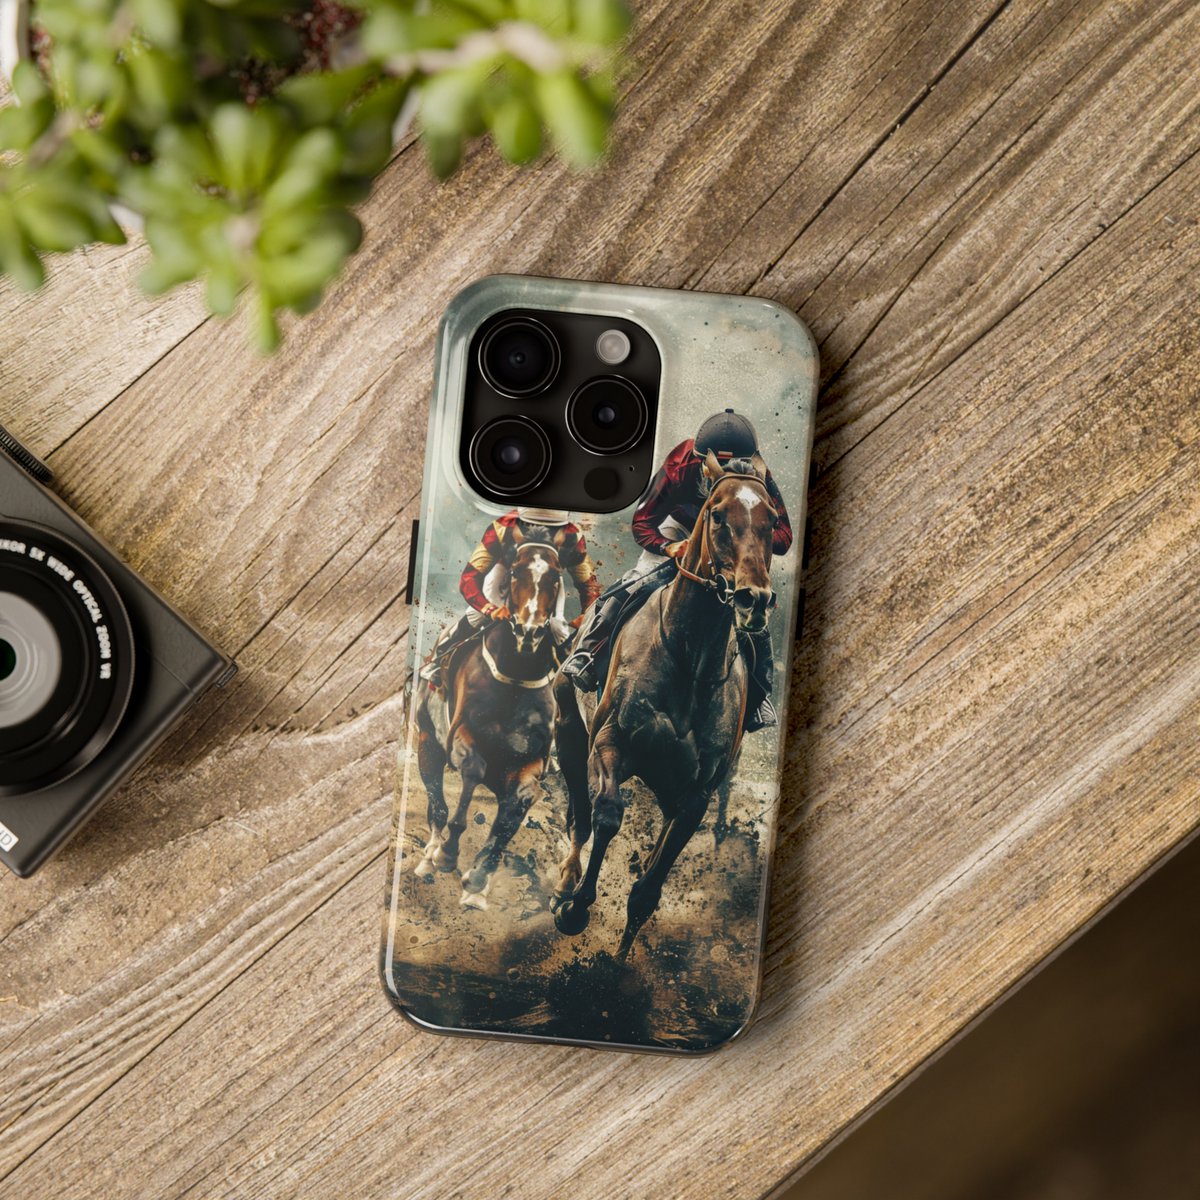 Horse Racing Derby phone case for iPhone - Link in Bio!

#phonecase #iphonecase #aestheticphonecase #aesthetic #iphone11 #iphone12 #iphone13 #iphone14 #iphone15
#horse #horses #horselife #horselove #horselover #horsesofinstagram #horsederby #derbyday #horseracing #horseracingart